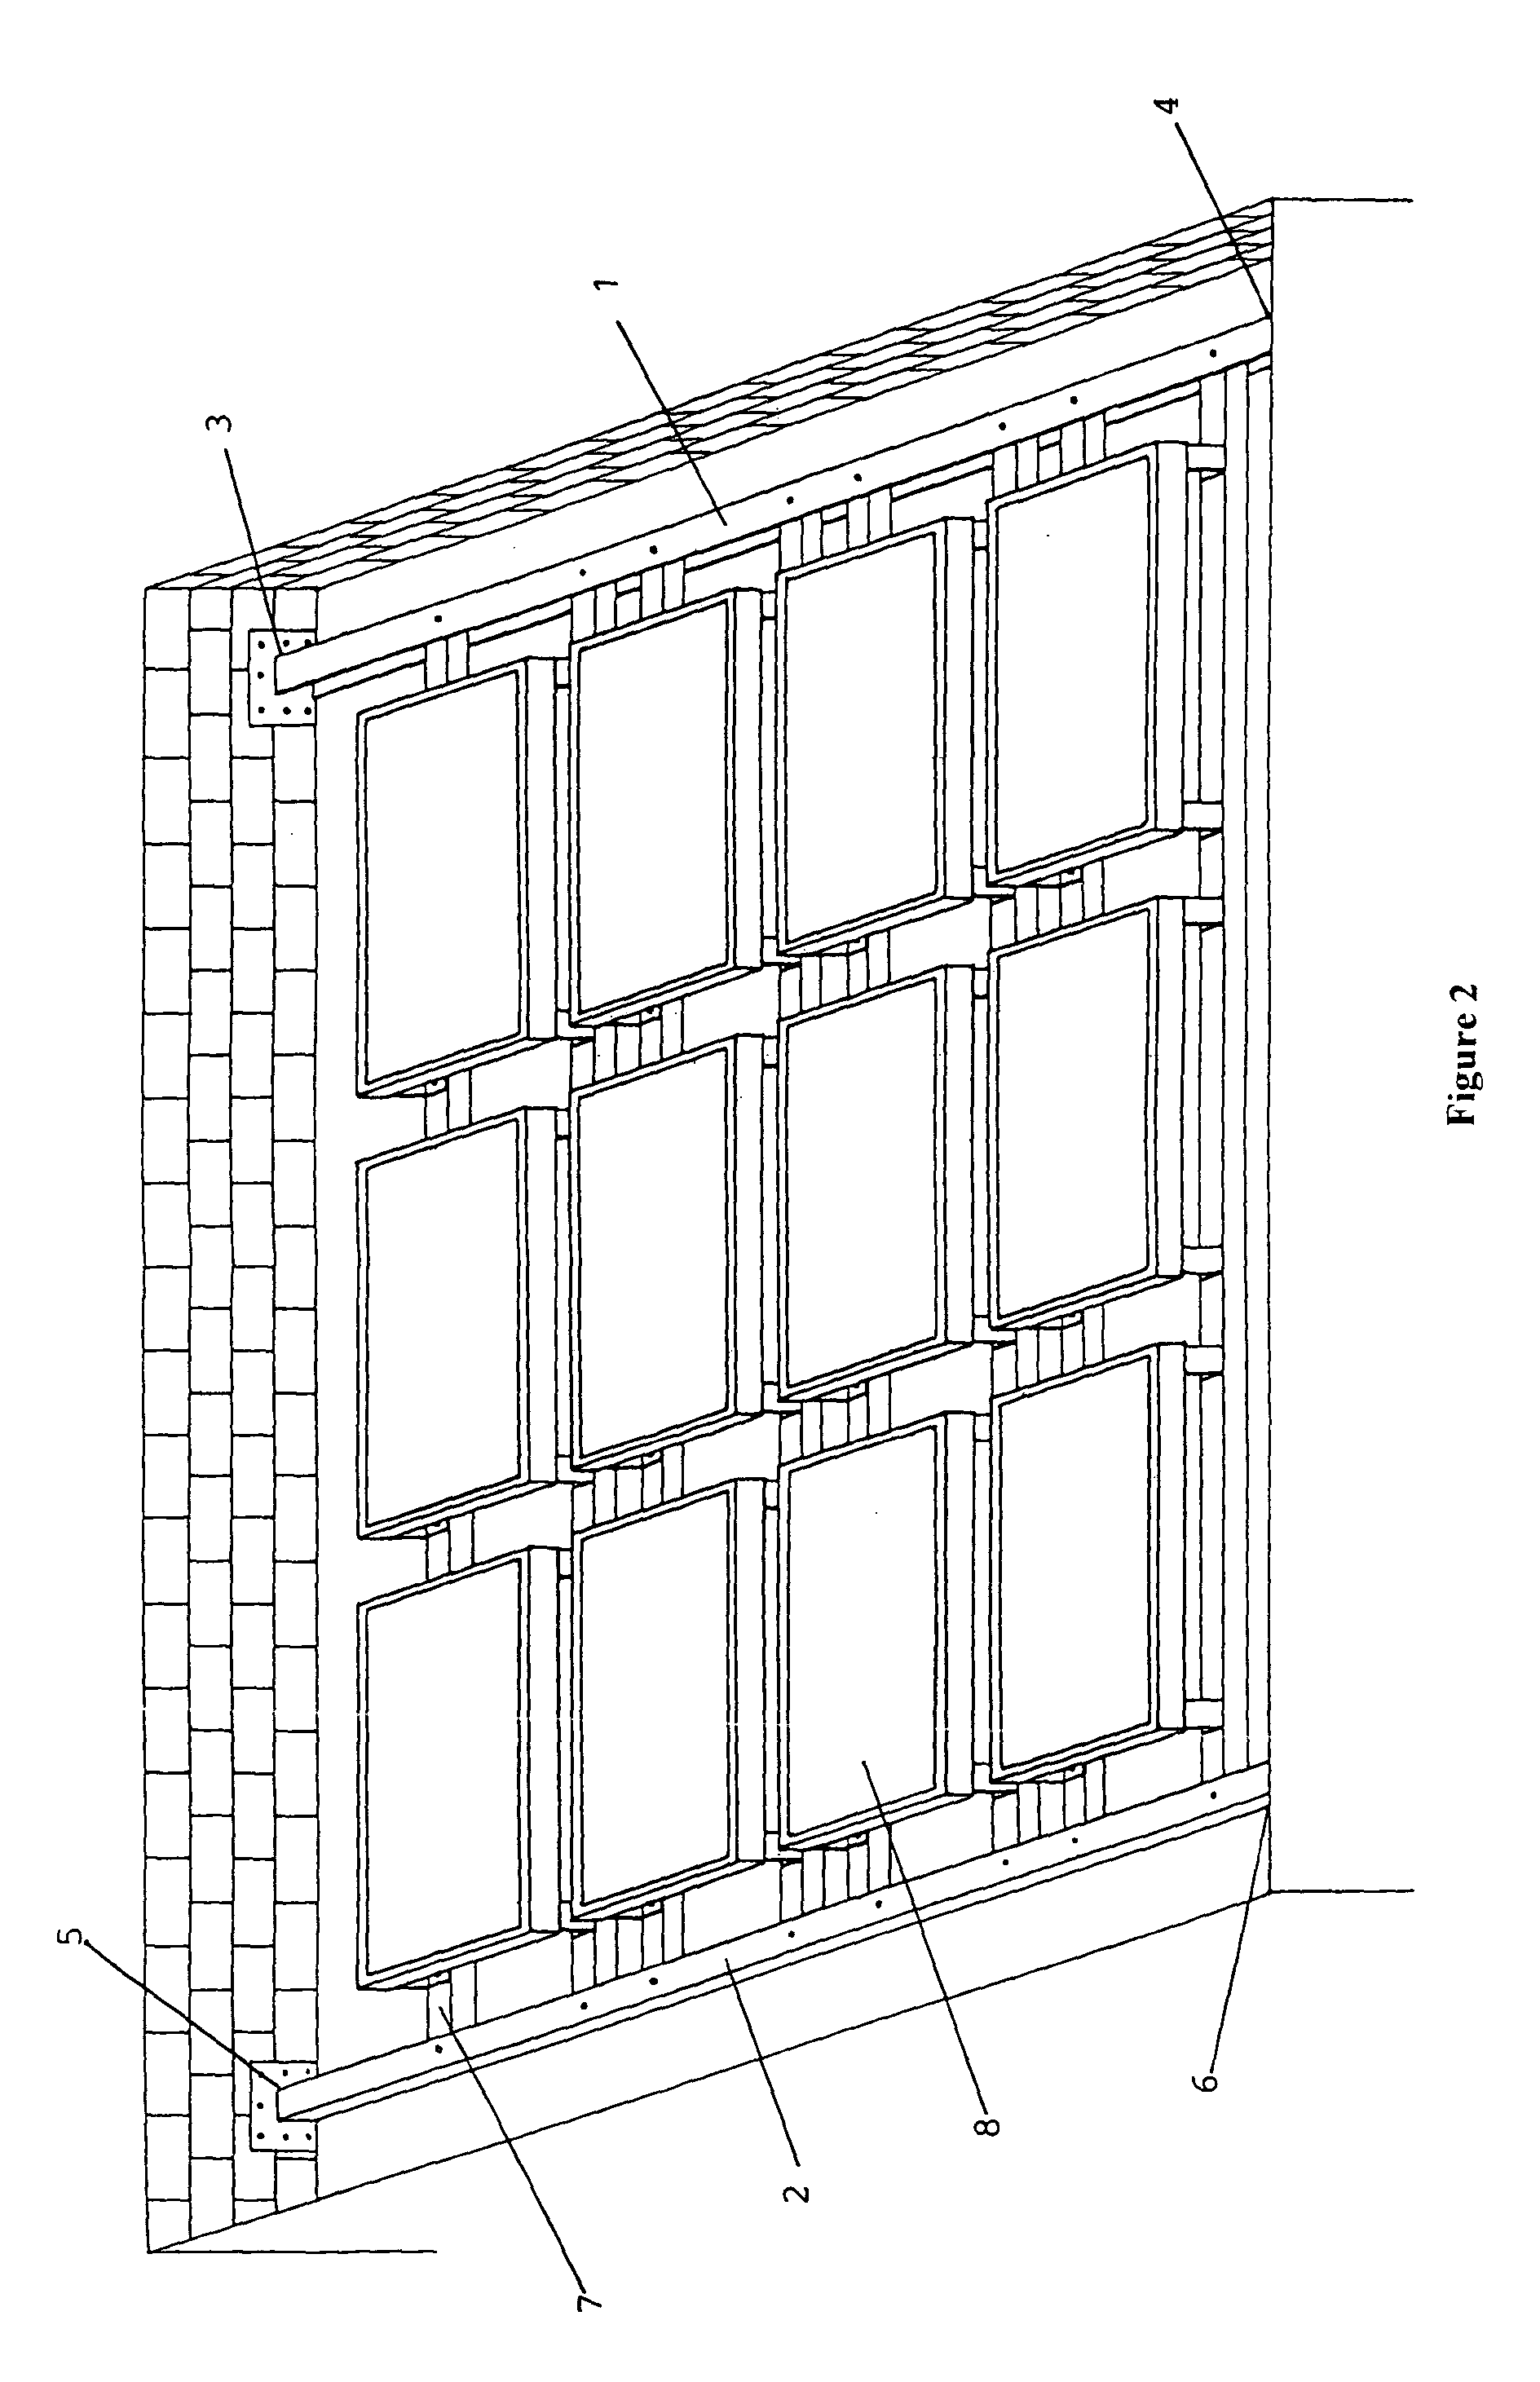 Photovoltaic attachment system